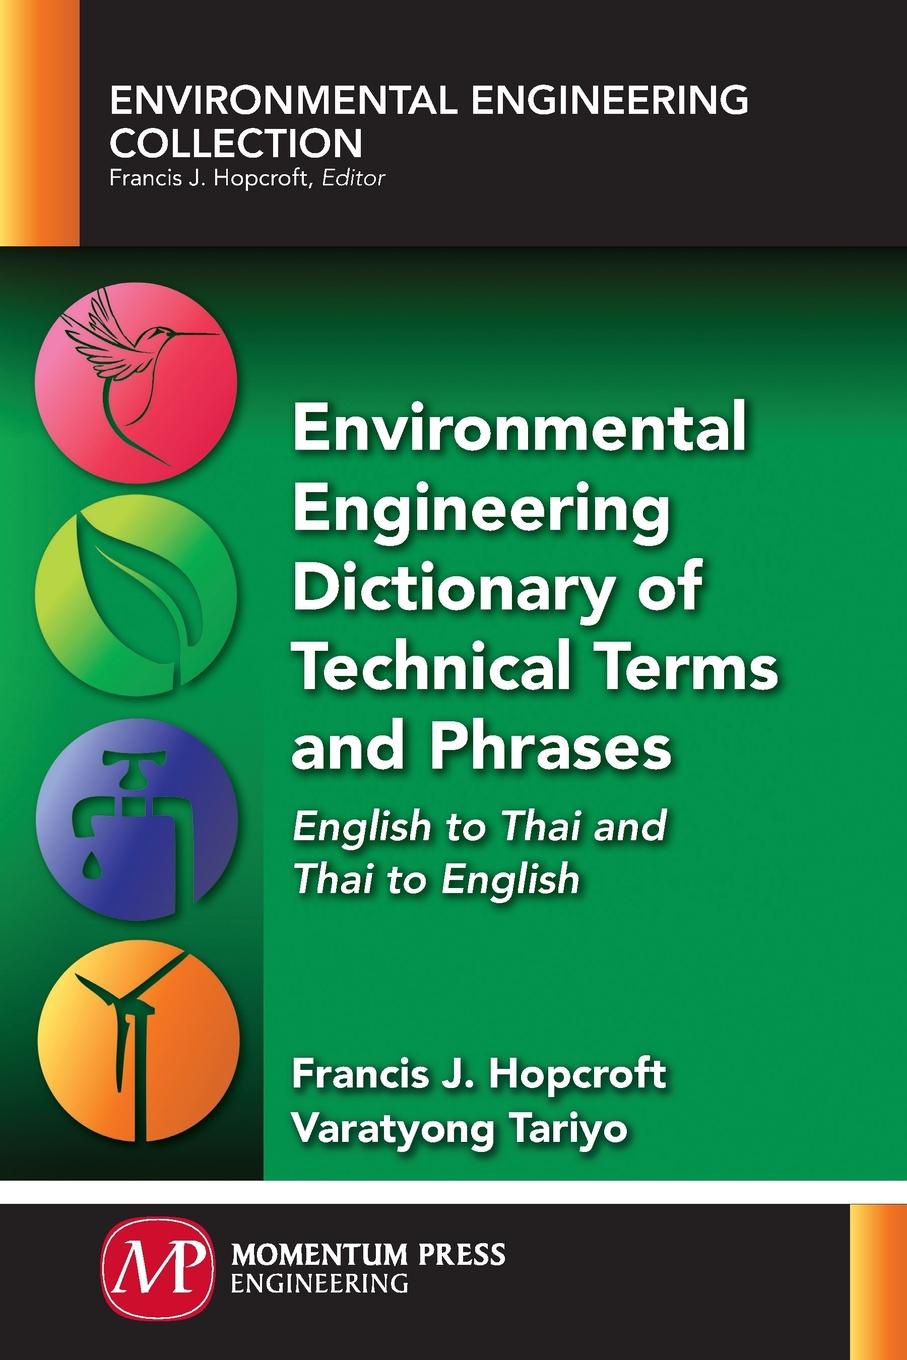 Environmental Engineering Dictionary of Technical Terms and Phrases. English to Thai and Thai to English